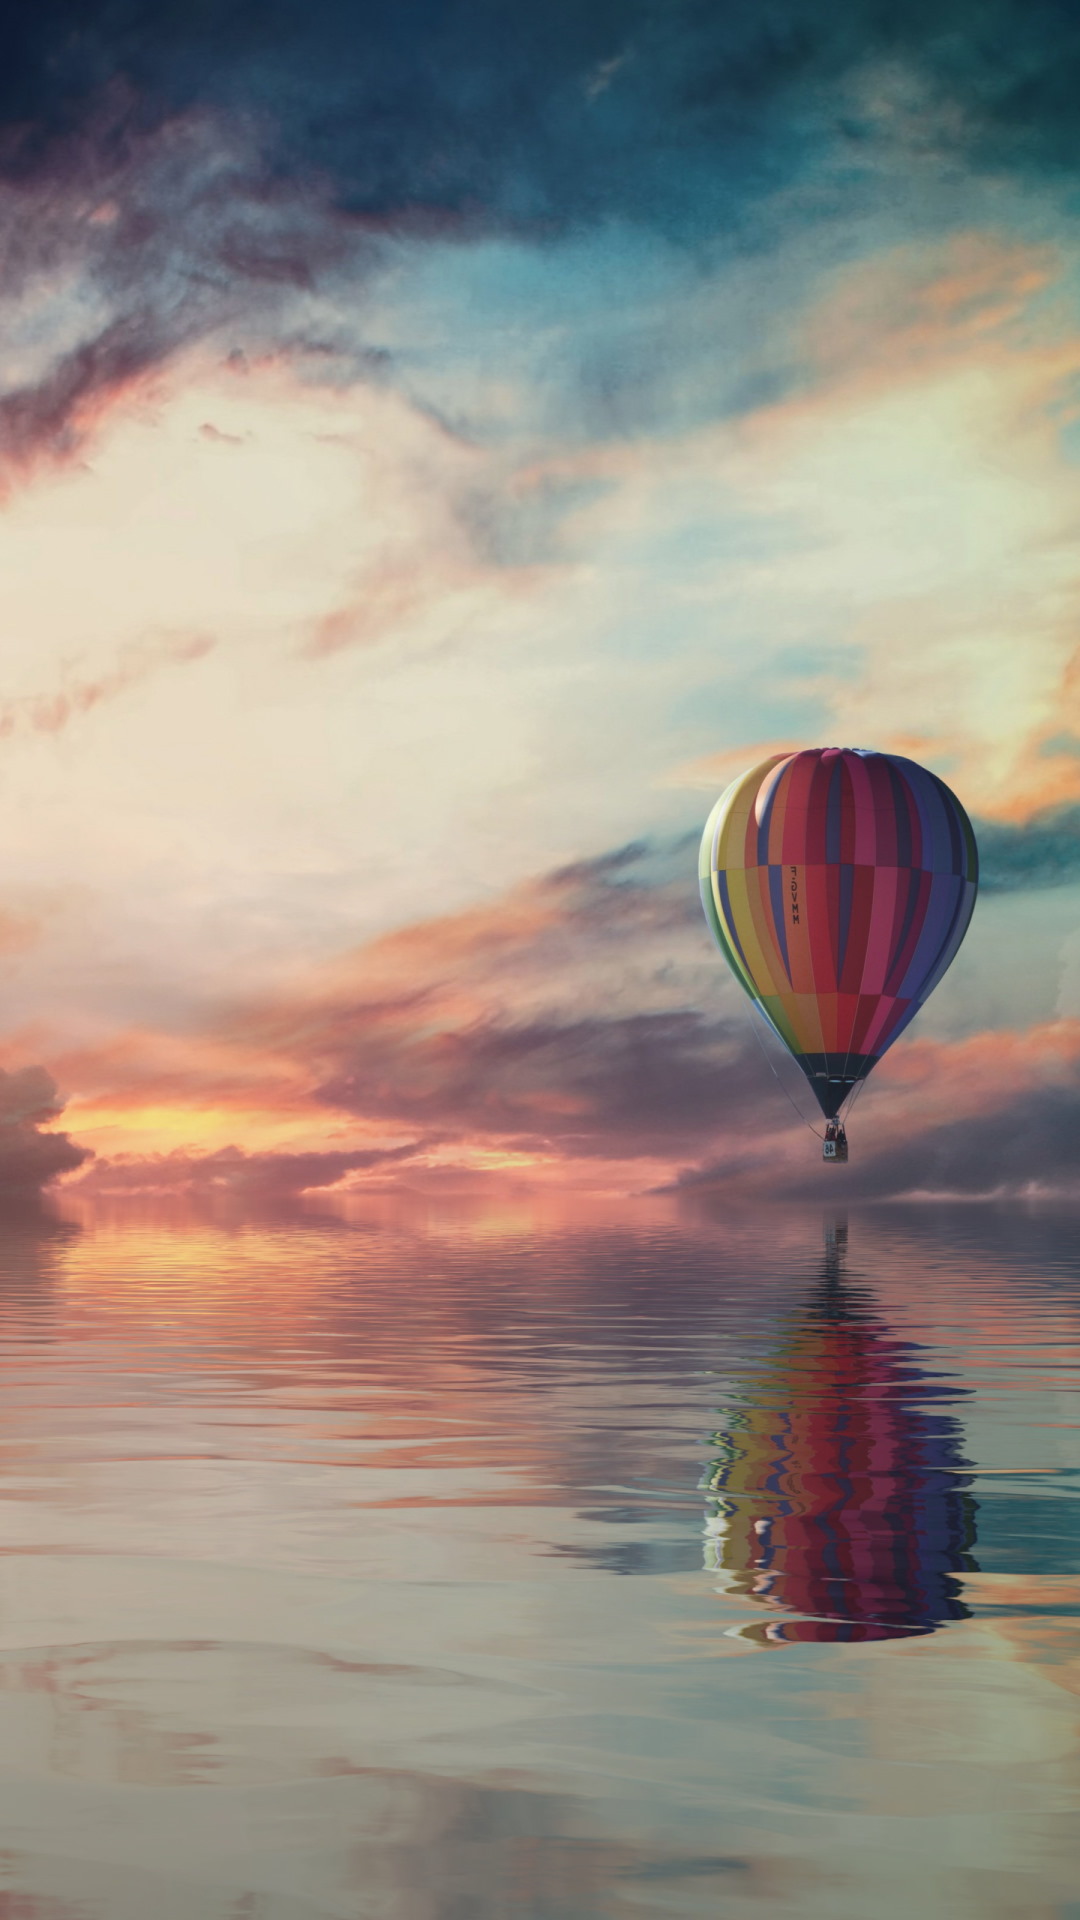 Fantasy travel with the hot air balloon wallpaper 1080x1920